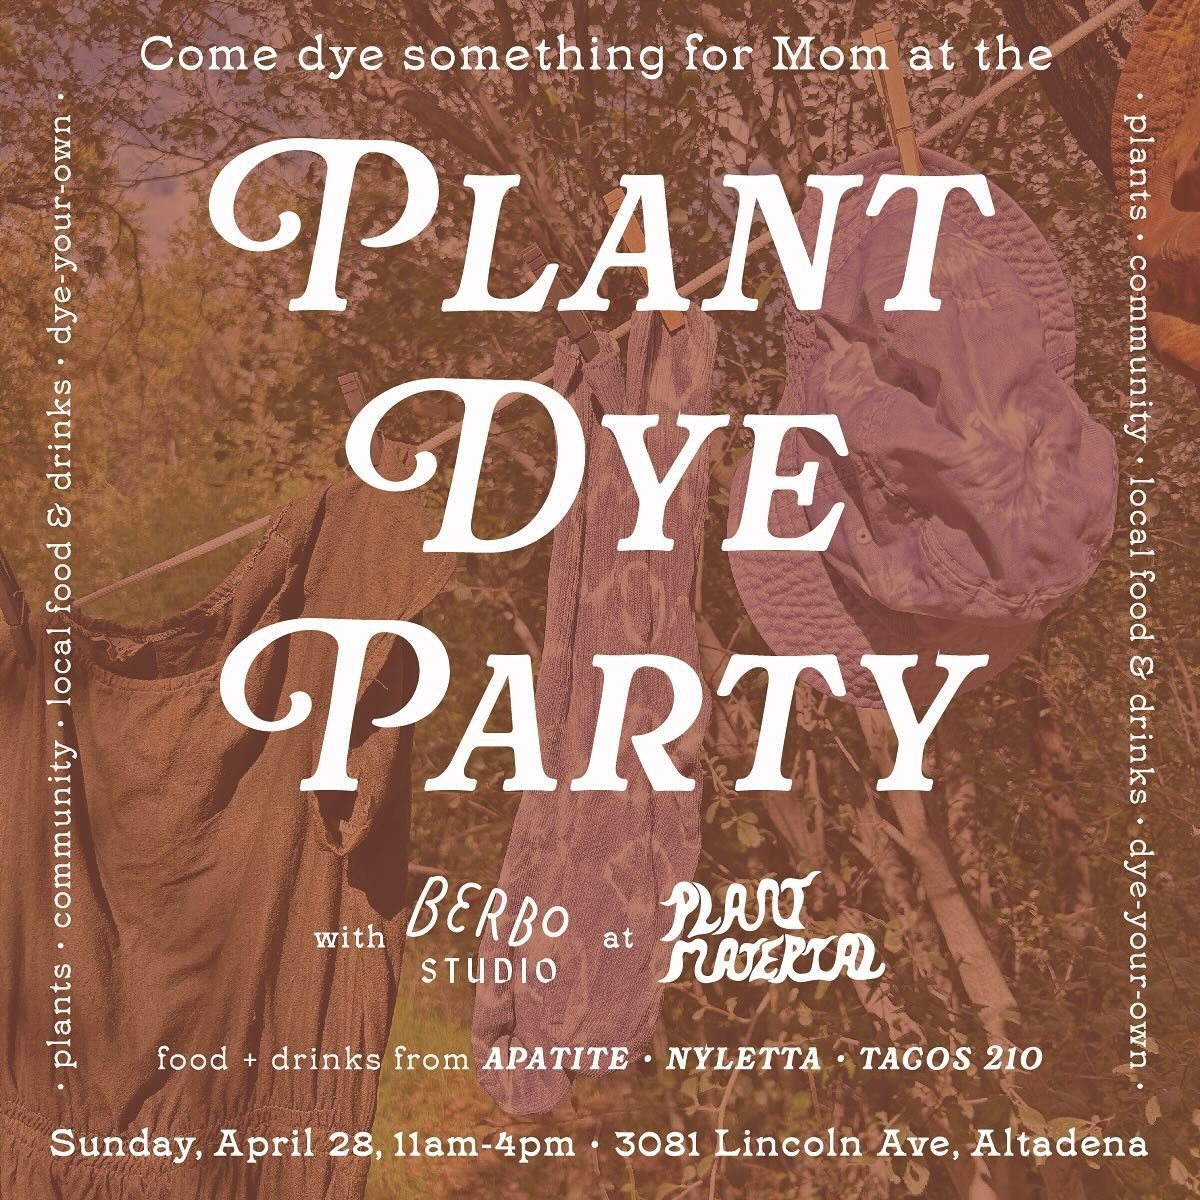 Join me for another plant dye party at @plant_material in Altadena! 🪅

A perfect time to make something for mom &ndash; the party is two weeks before Mother&rsquo;s Day &ndash; or for yourself! 💐

I&rsquo;ll have a menu of a la carte blank items fo